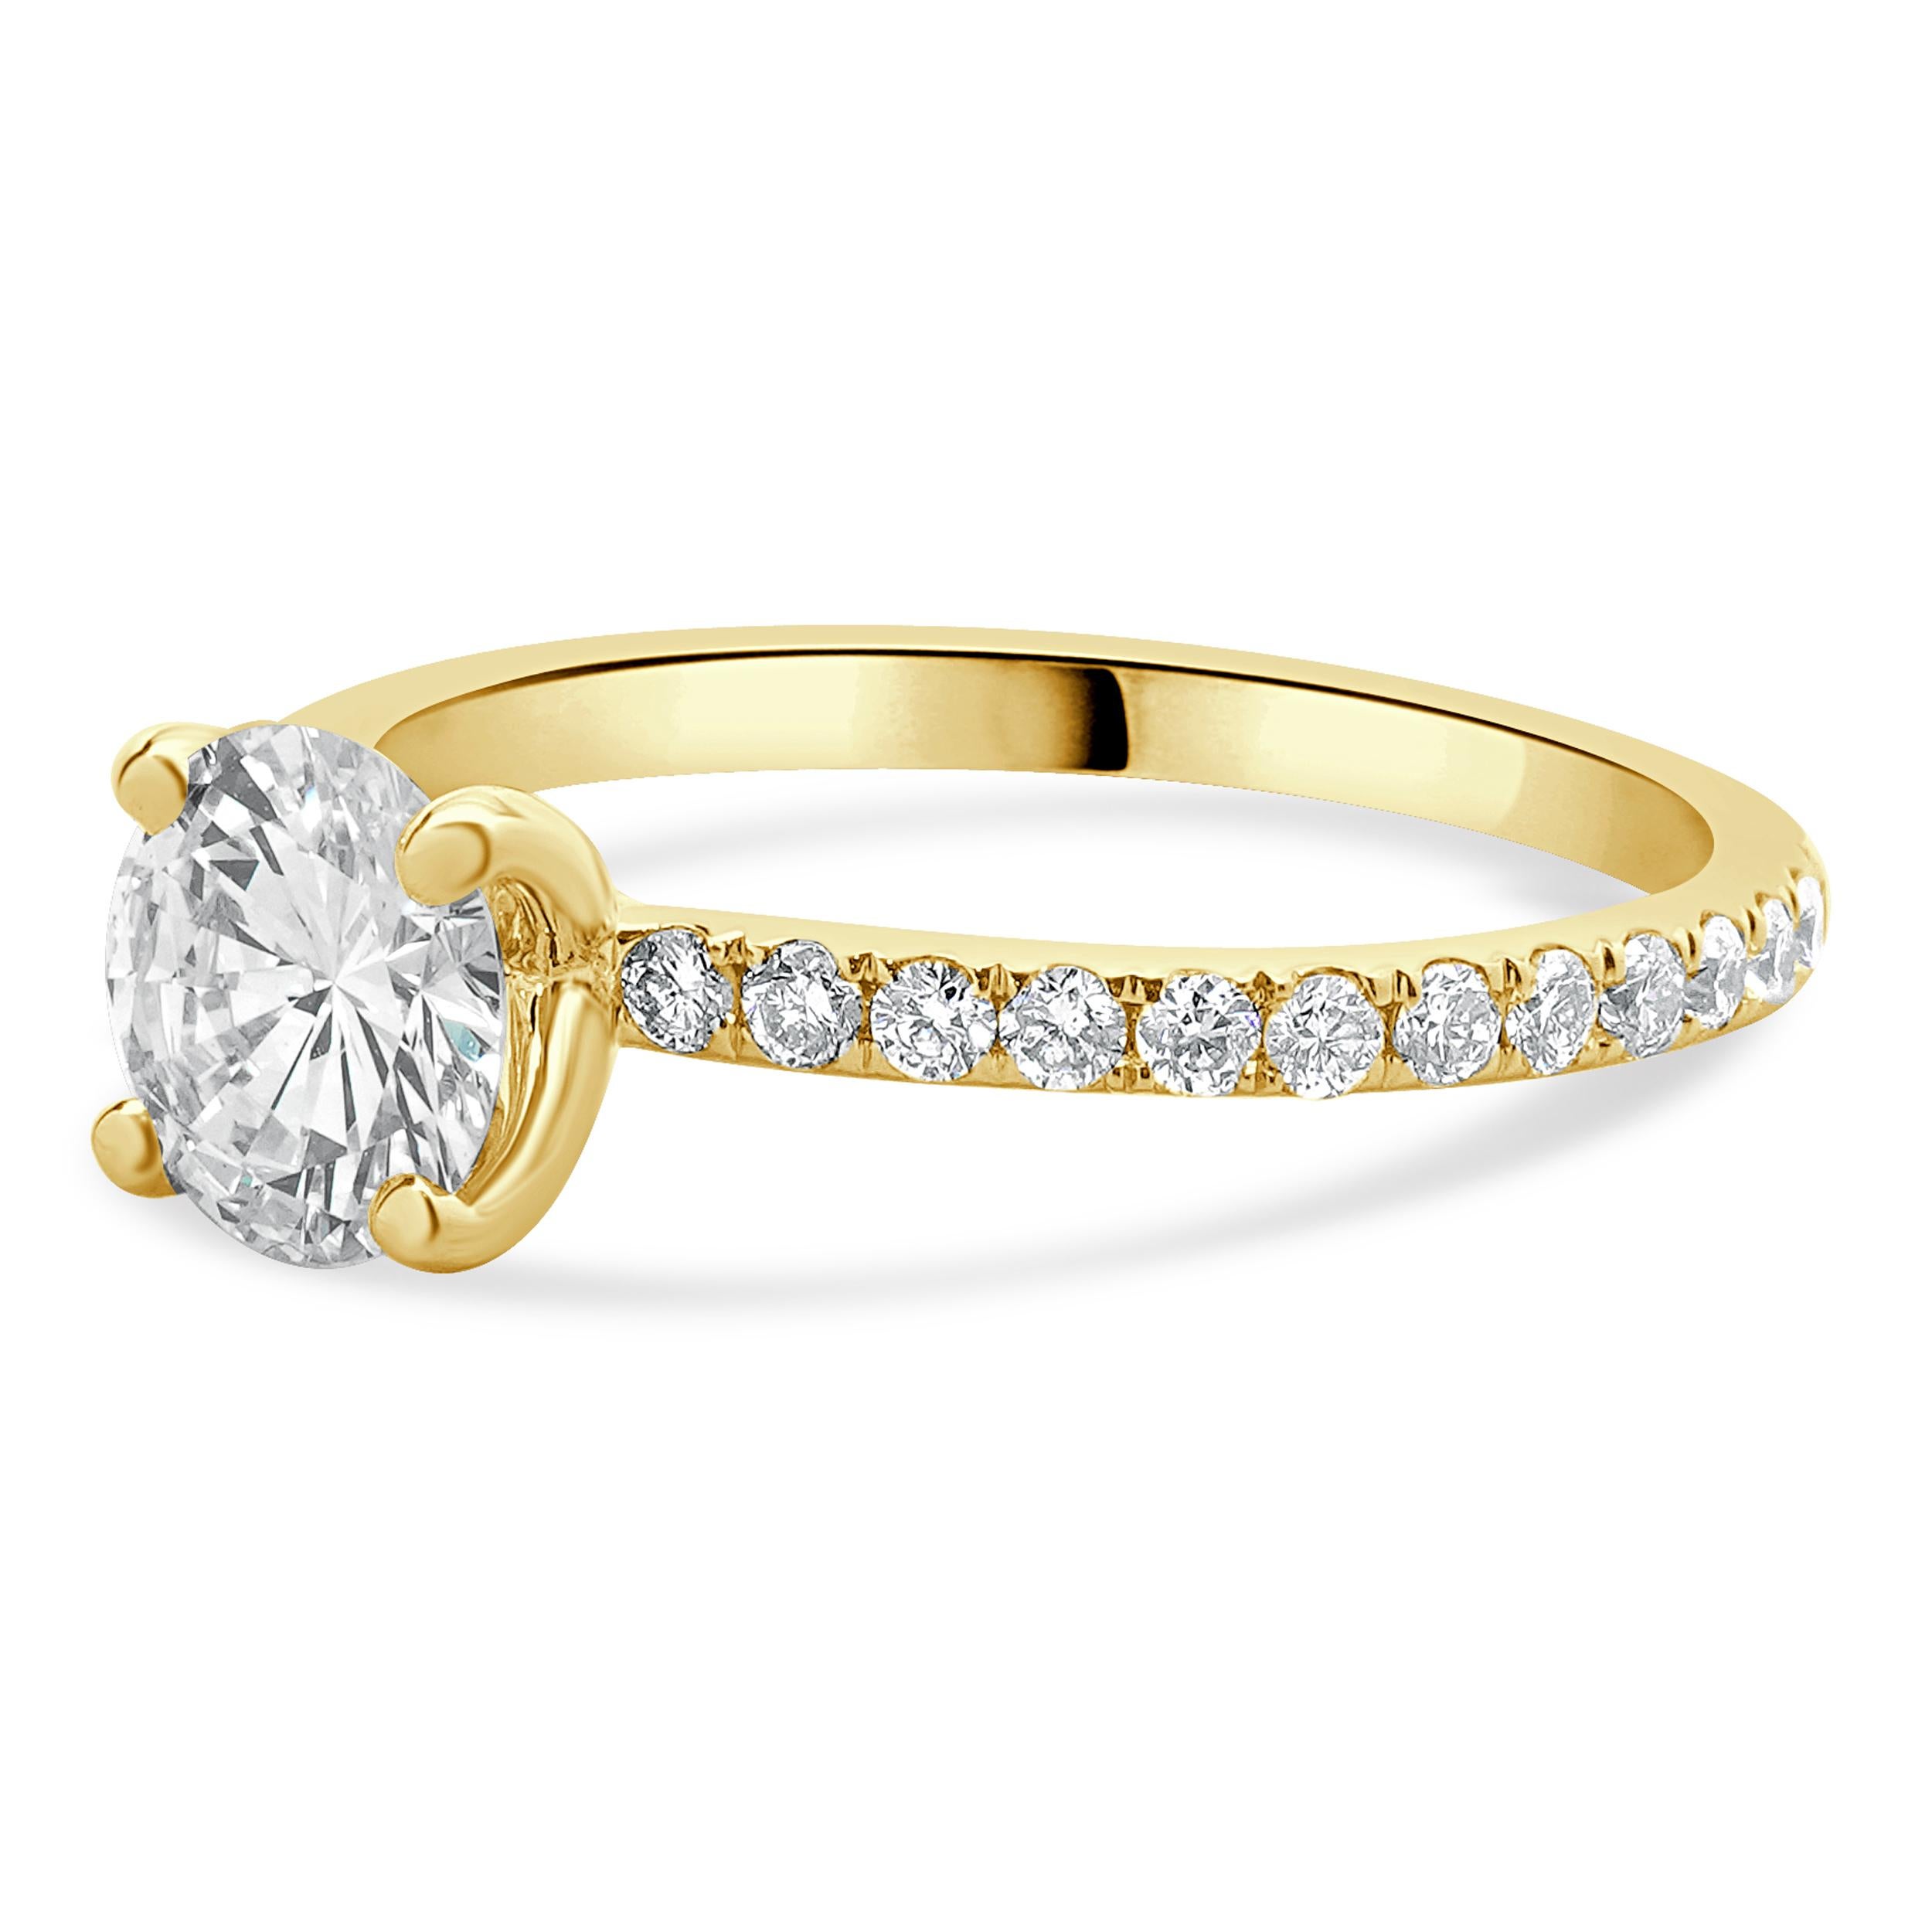 Designer: custom
Material: 14K yellow gold
Center Diamond: 1 round brilliant cut = 1.01ct
Color : L
Clarity : SI1
Diamond: 26 round brilliant cut = 0.78cttw
Color : G
Clarity : SI1
Dimensions: ring top measures 6.90mm
Size: 6.5 complimentary sizing